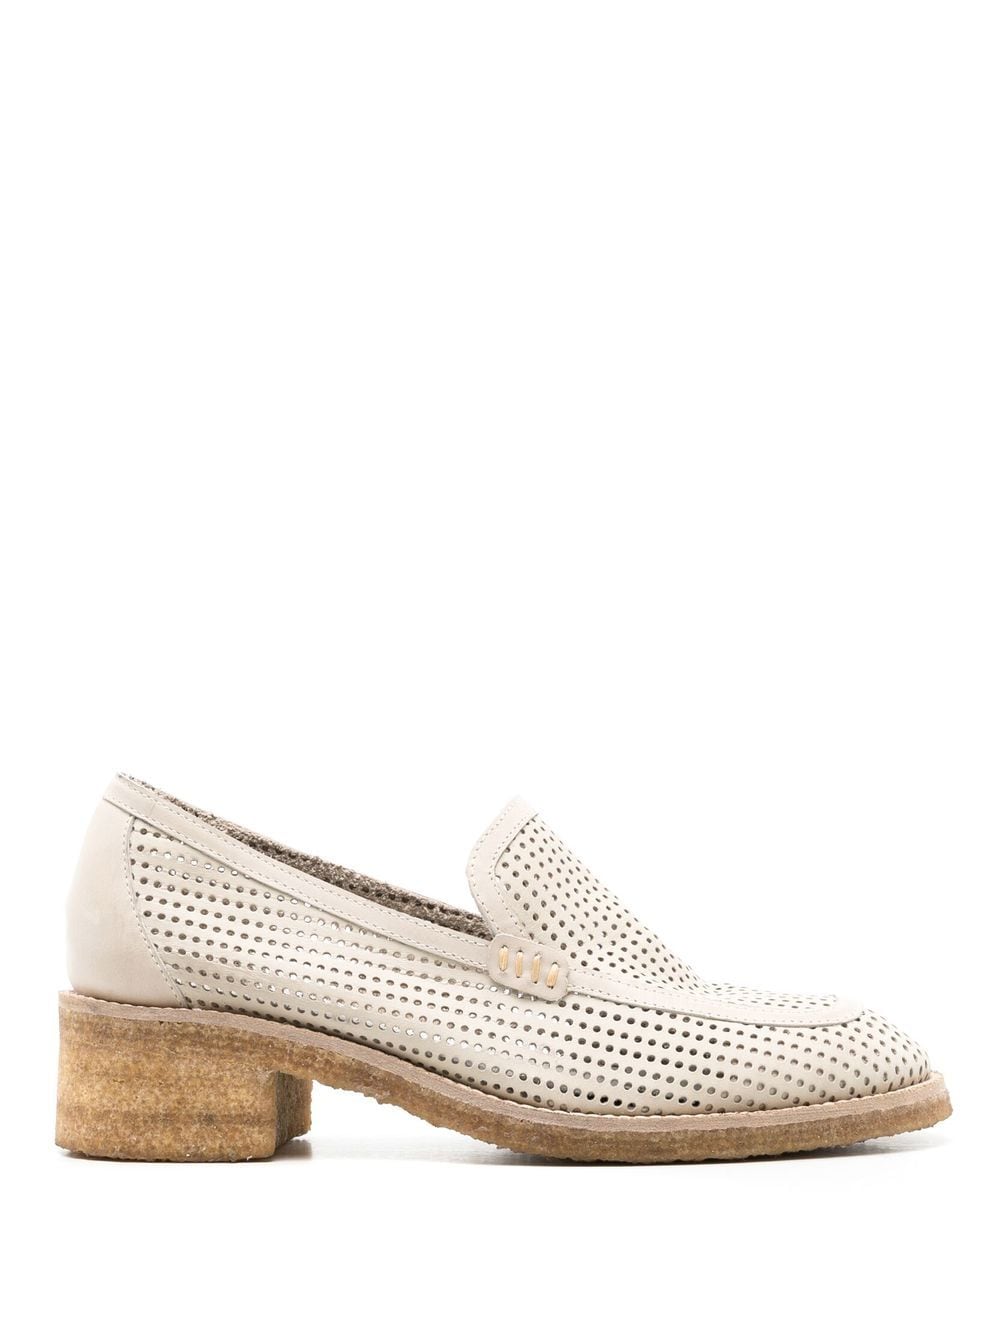 Sarah Chofakian Ronnie Perforated Oxford Shoes In Neutrals